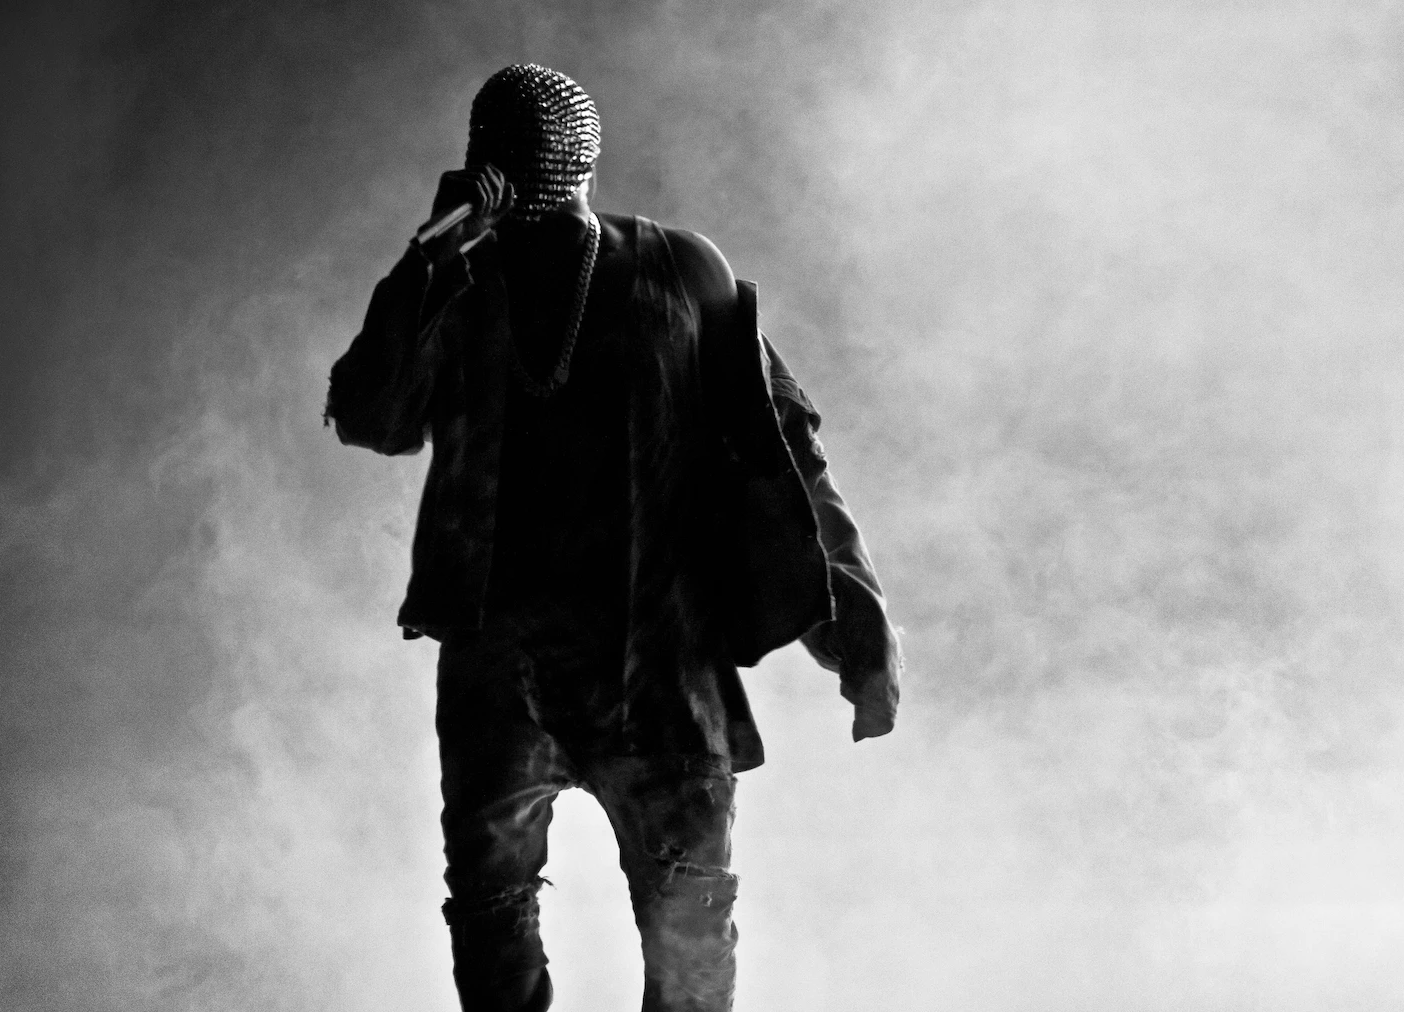 A photo of Kanye West on stage